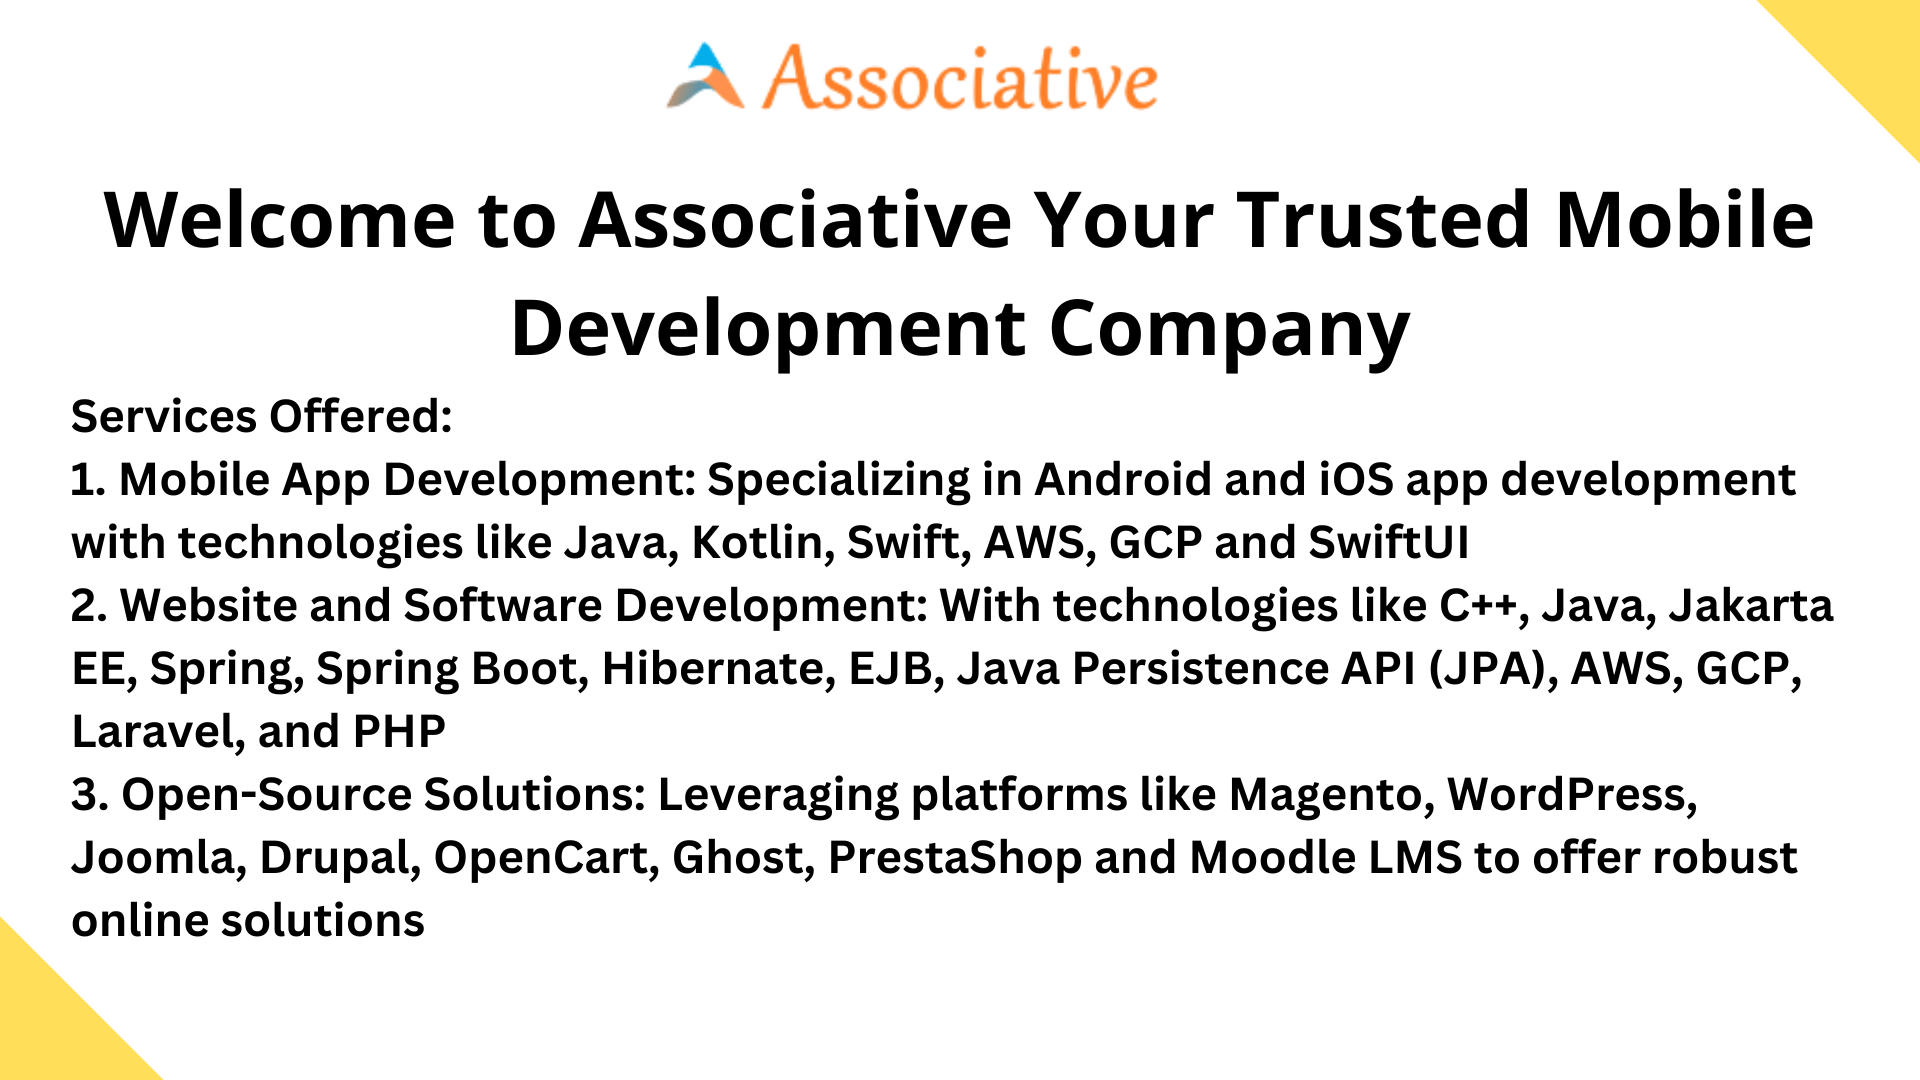 Welcome to Associative Your Trusted Mobile Development Company